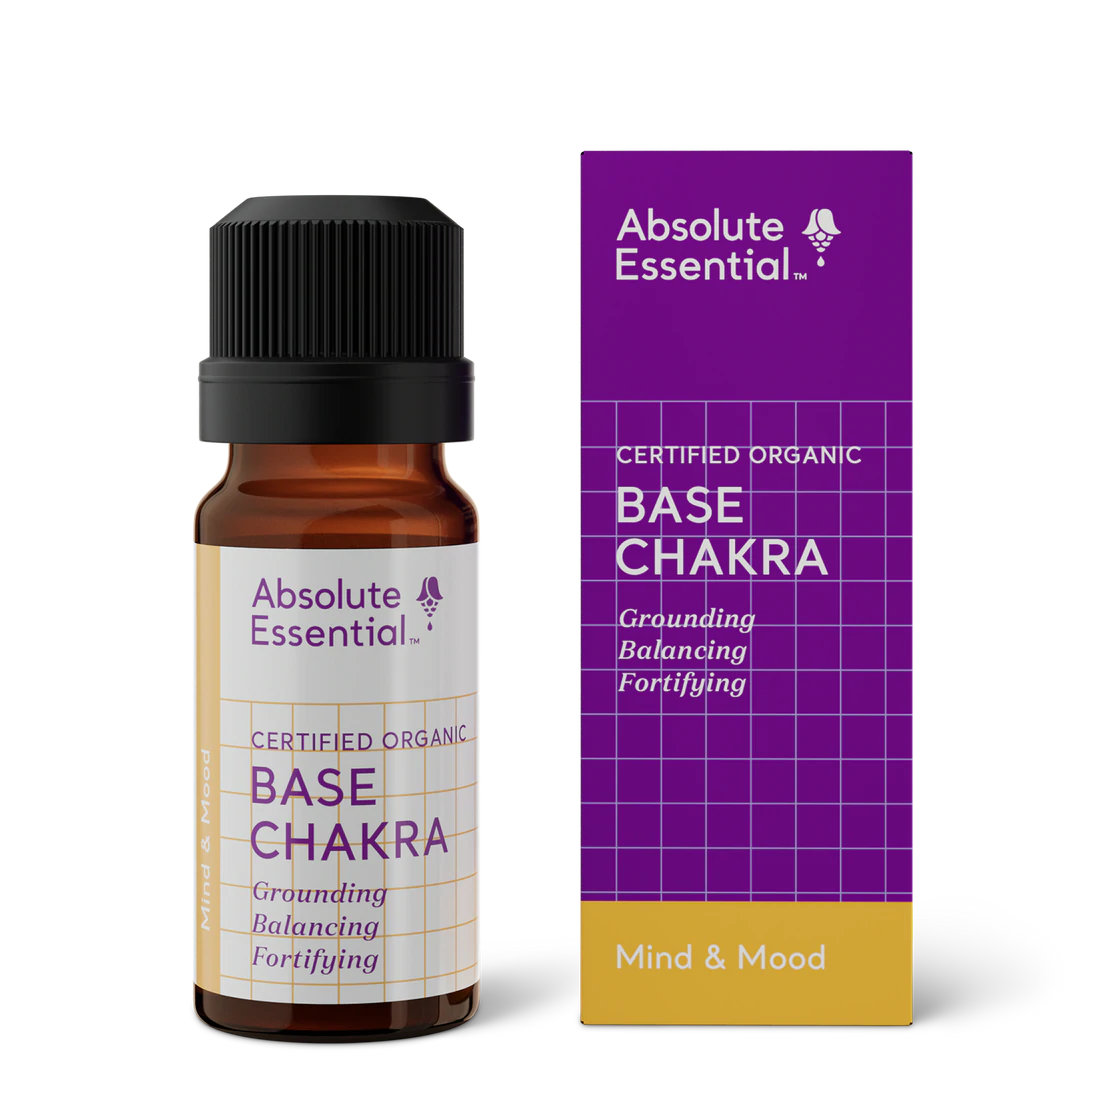 Absolute Essential Base Chakra